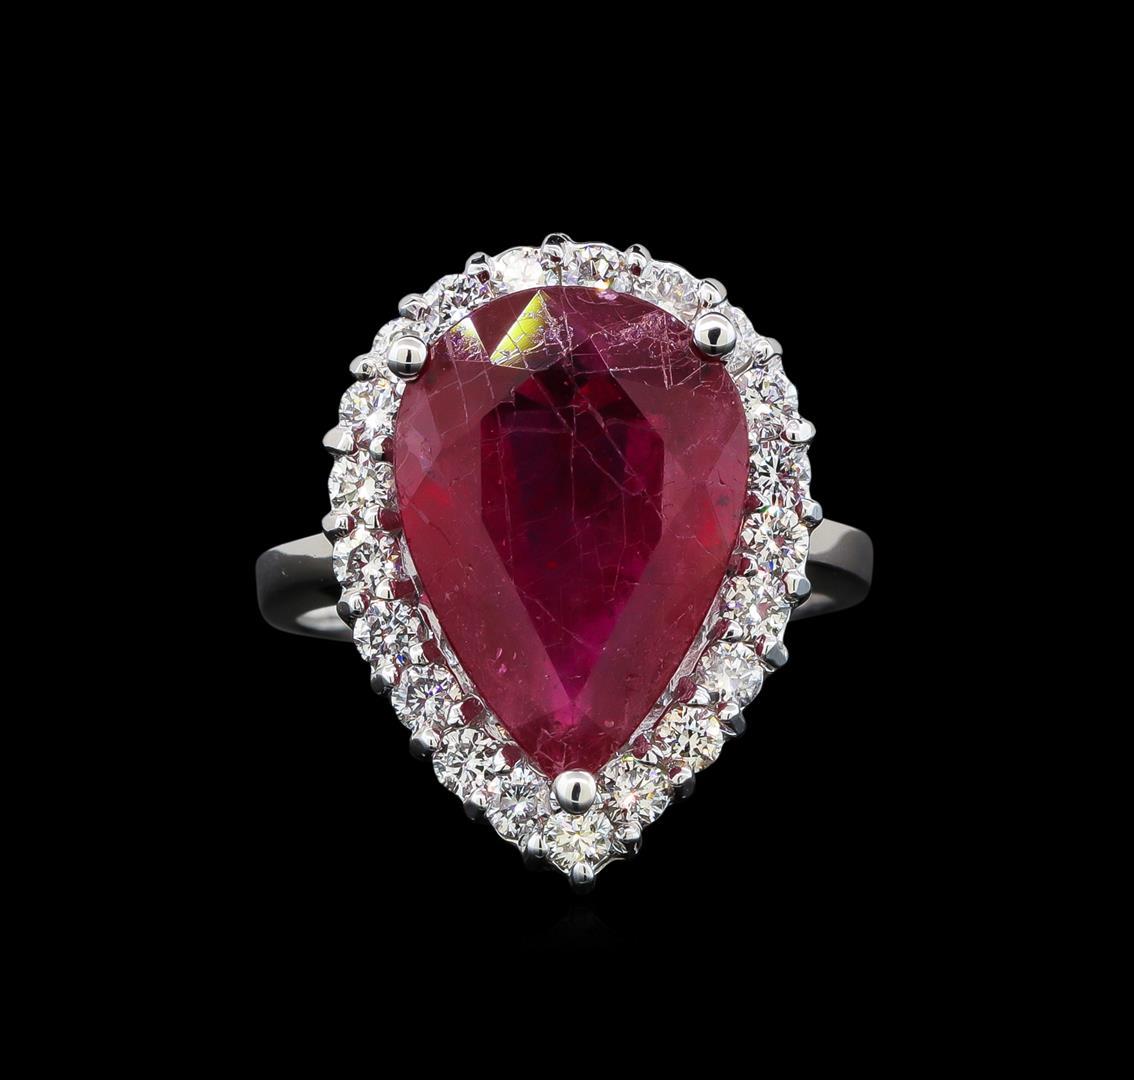 14KT White Gold 5.88 ctw Ruby and Diamond Ring